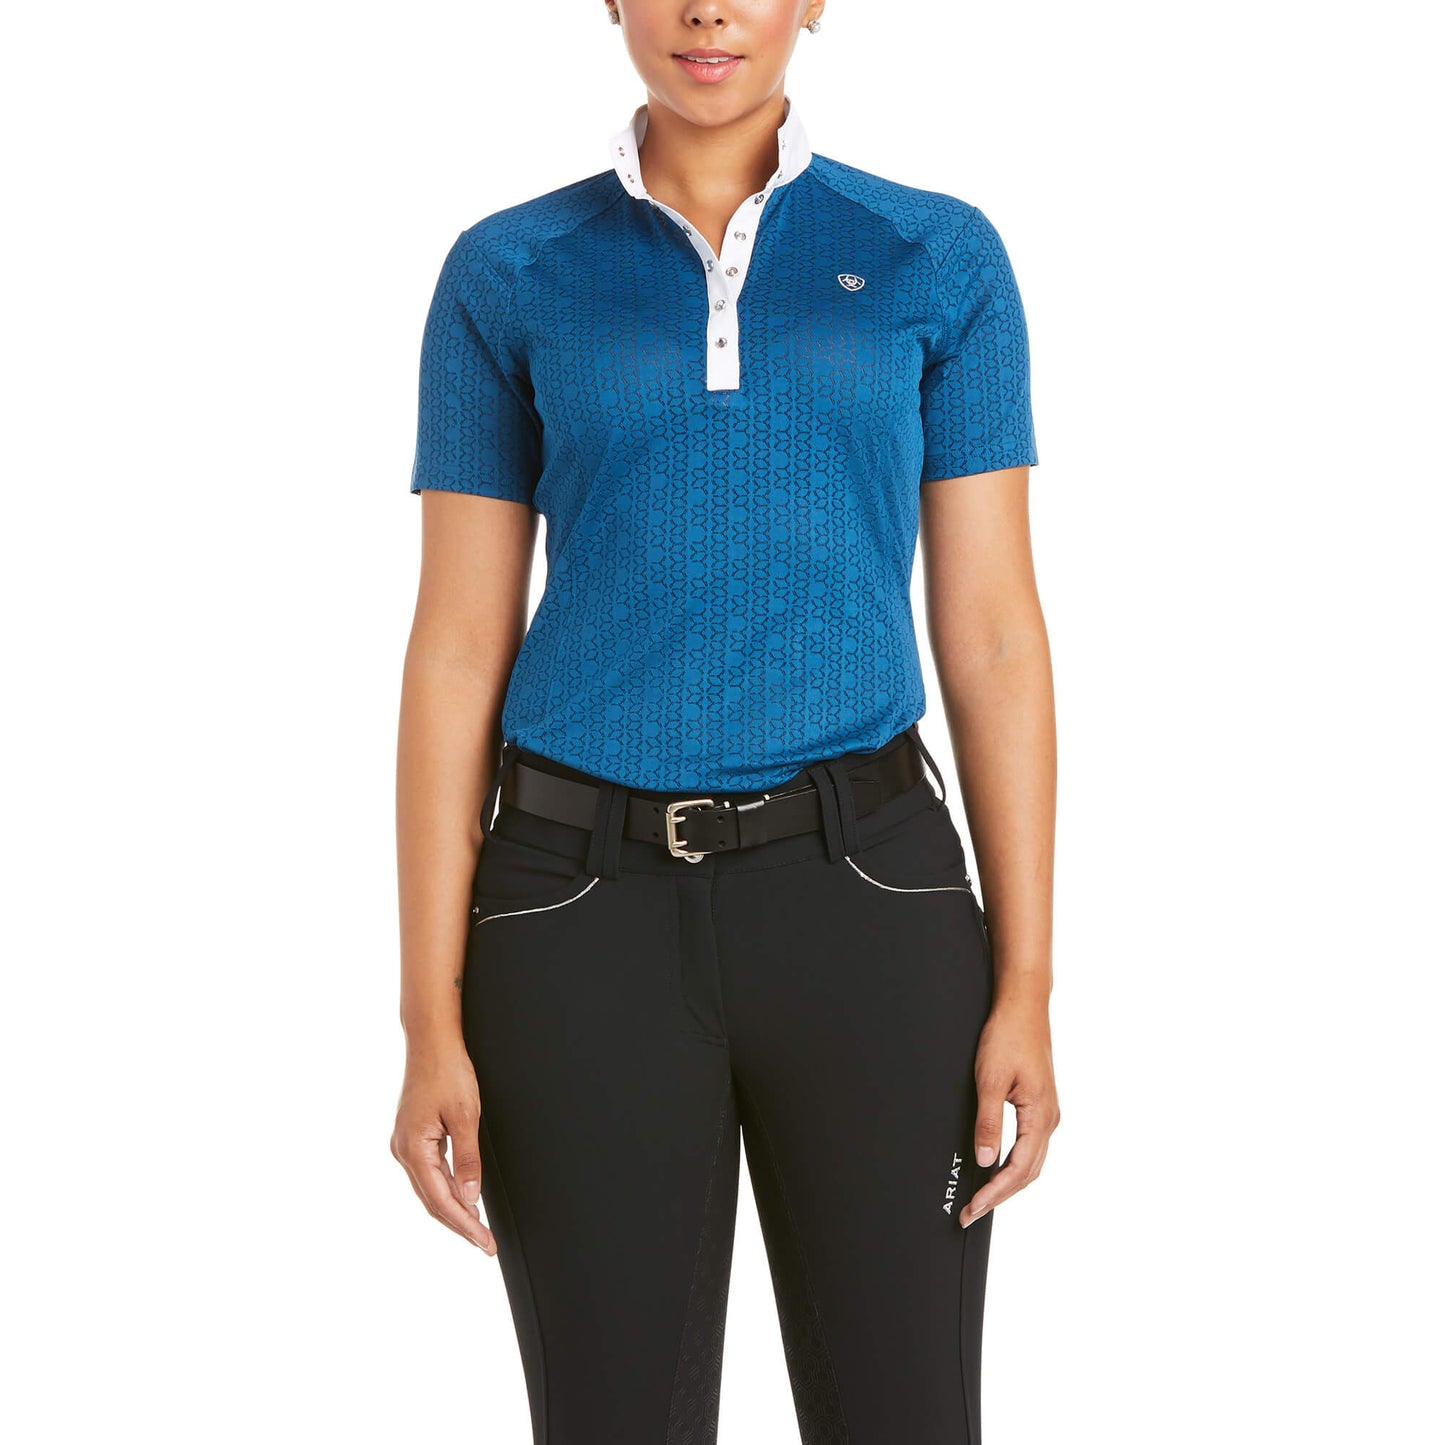 Ariat Blue Opal Showstopper Competition Shirt